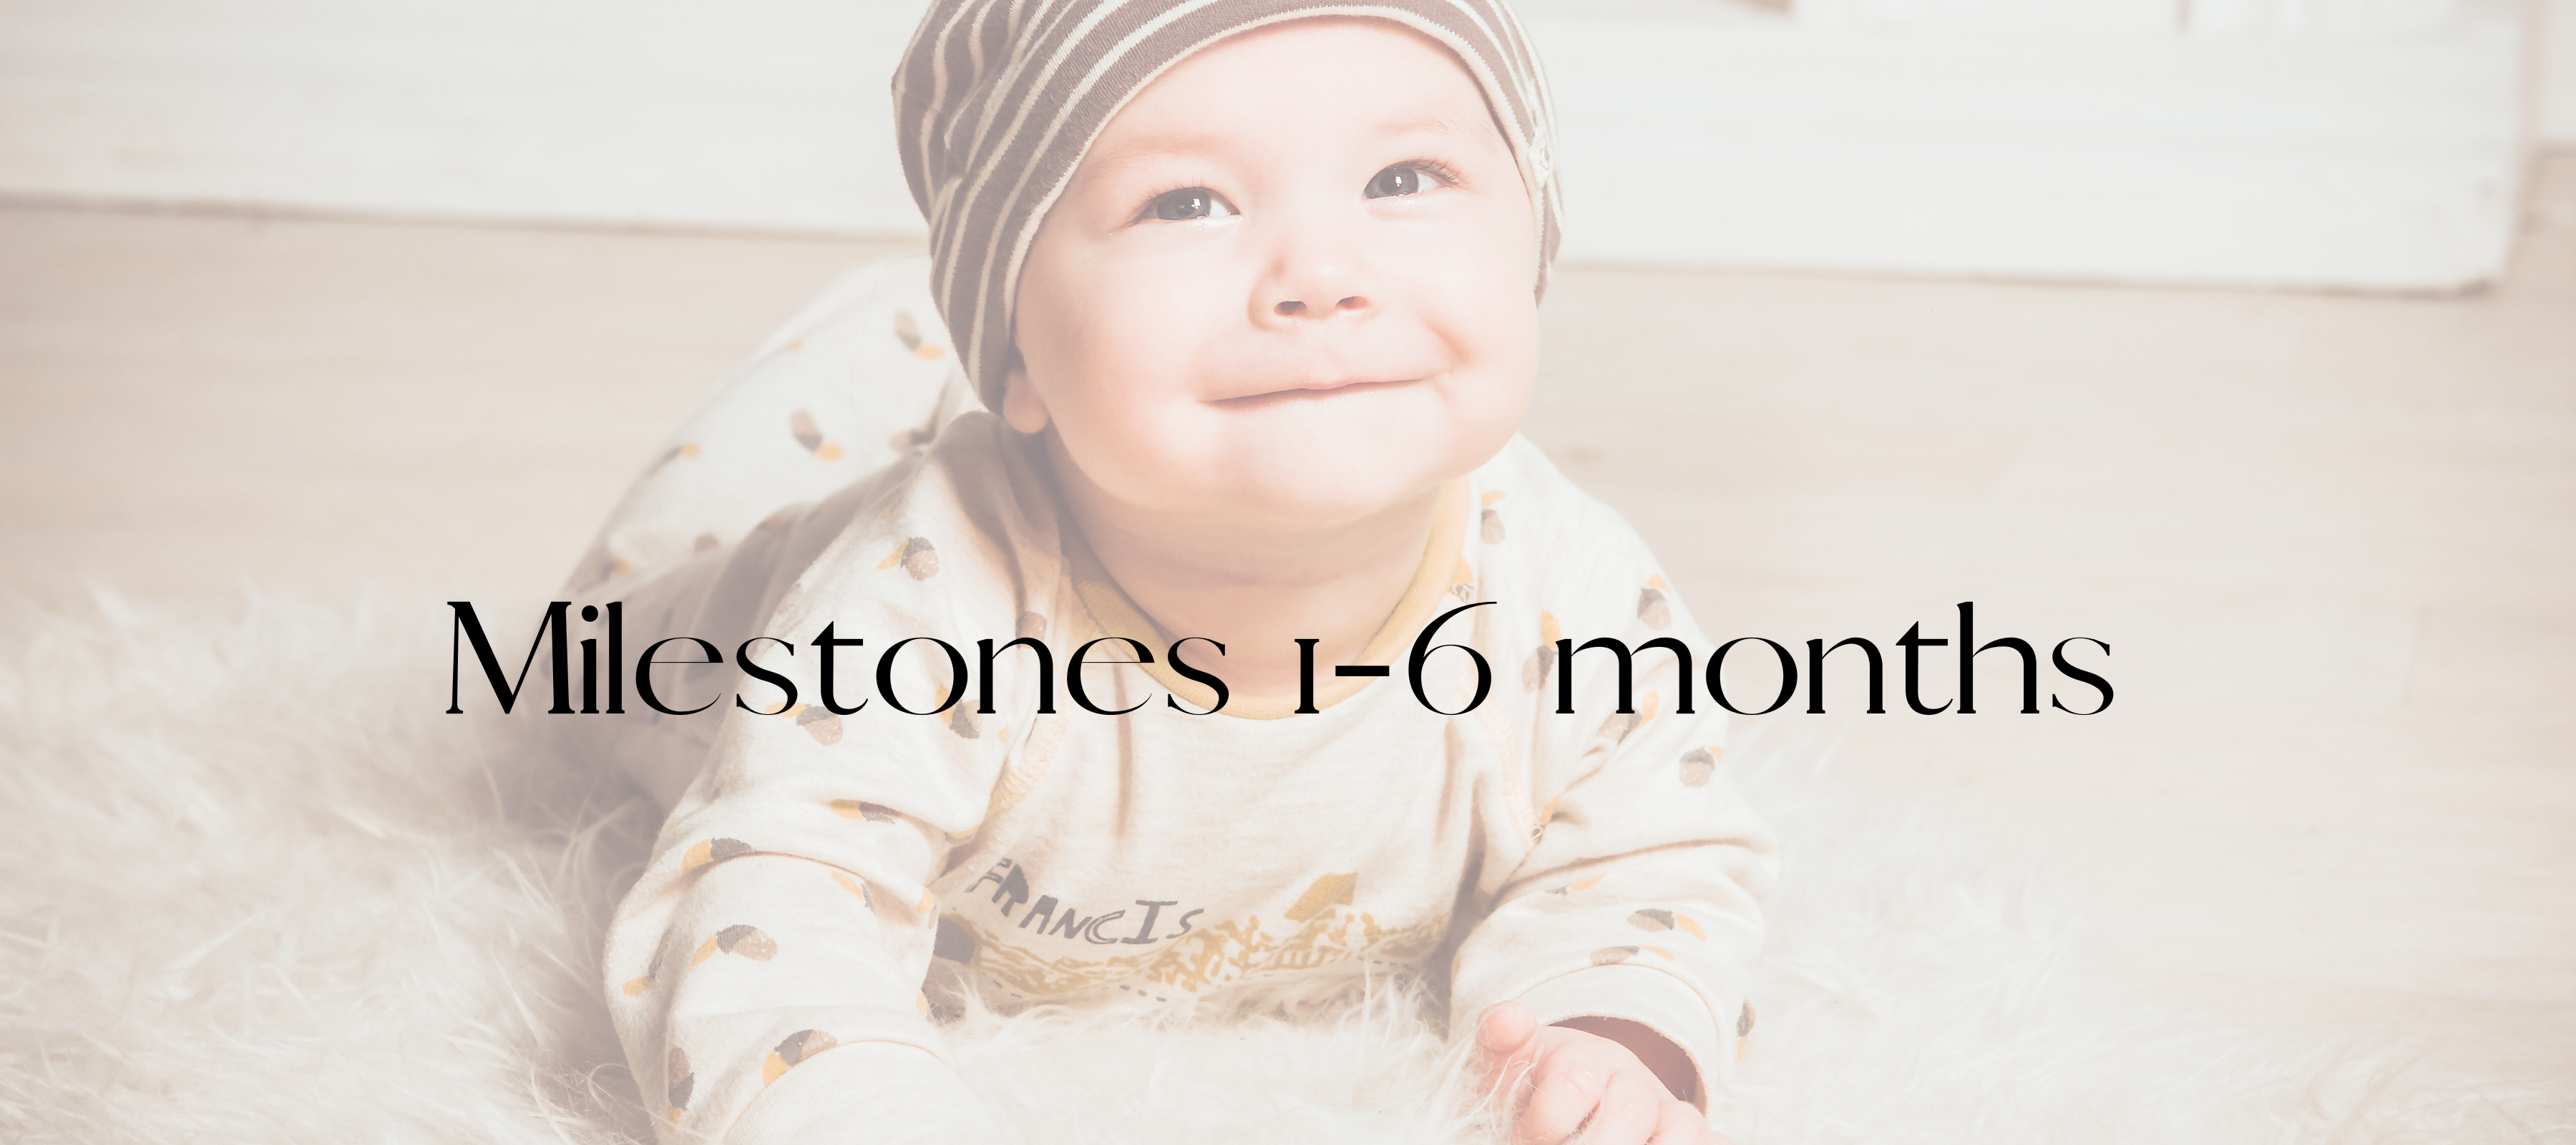 Milestones in the first 6 months